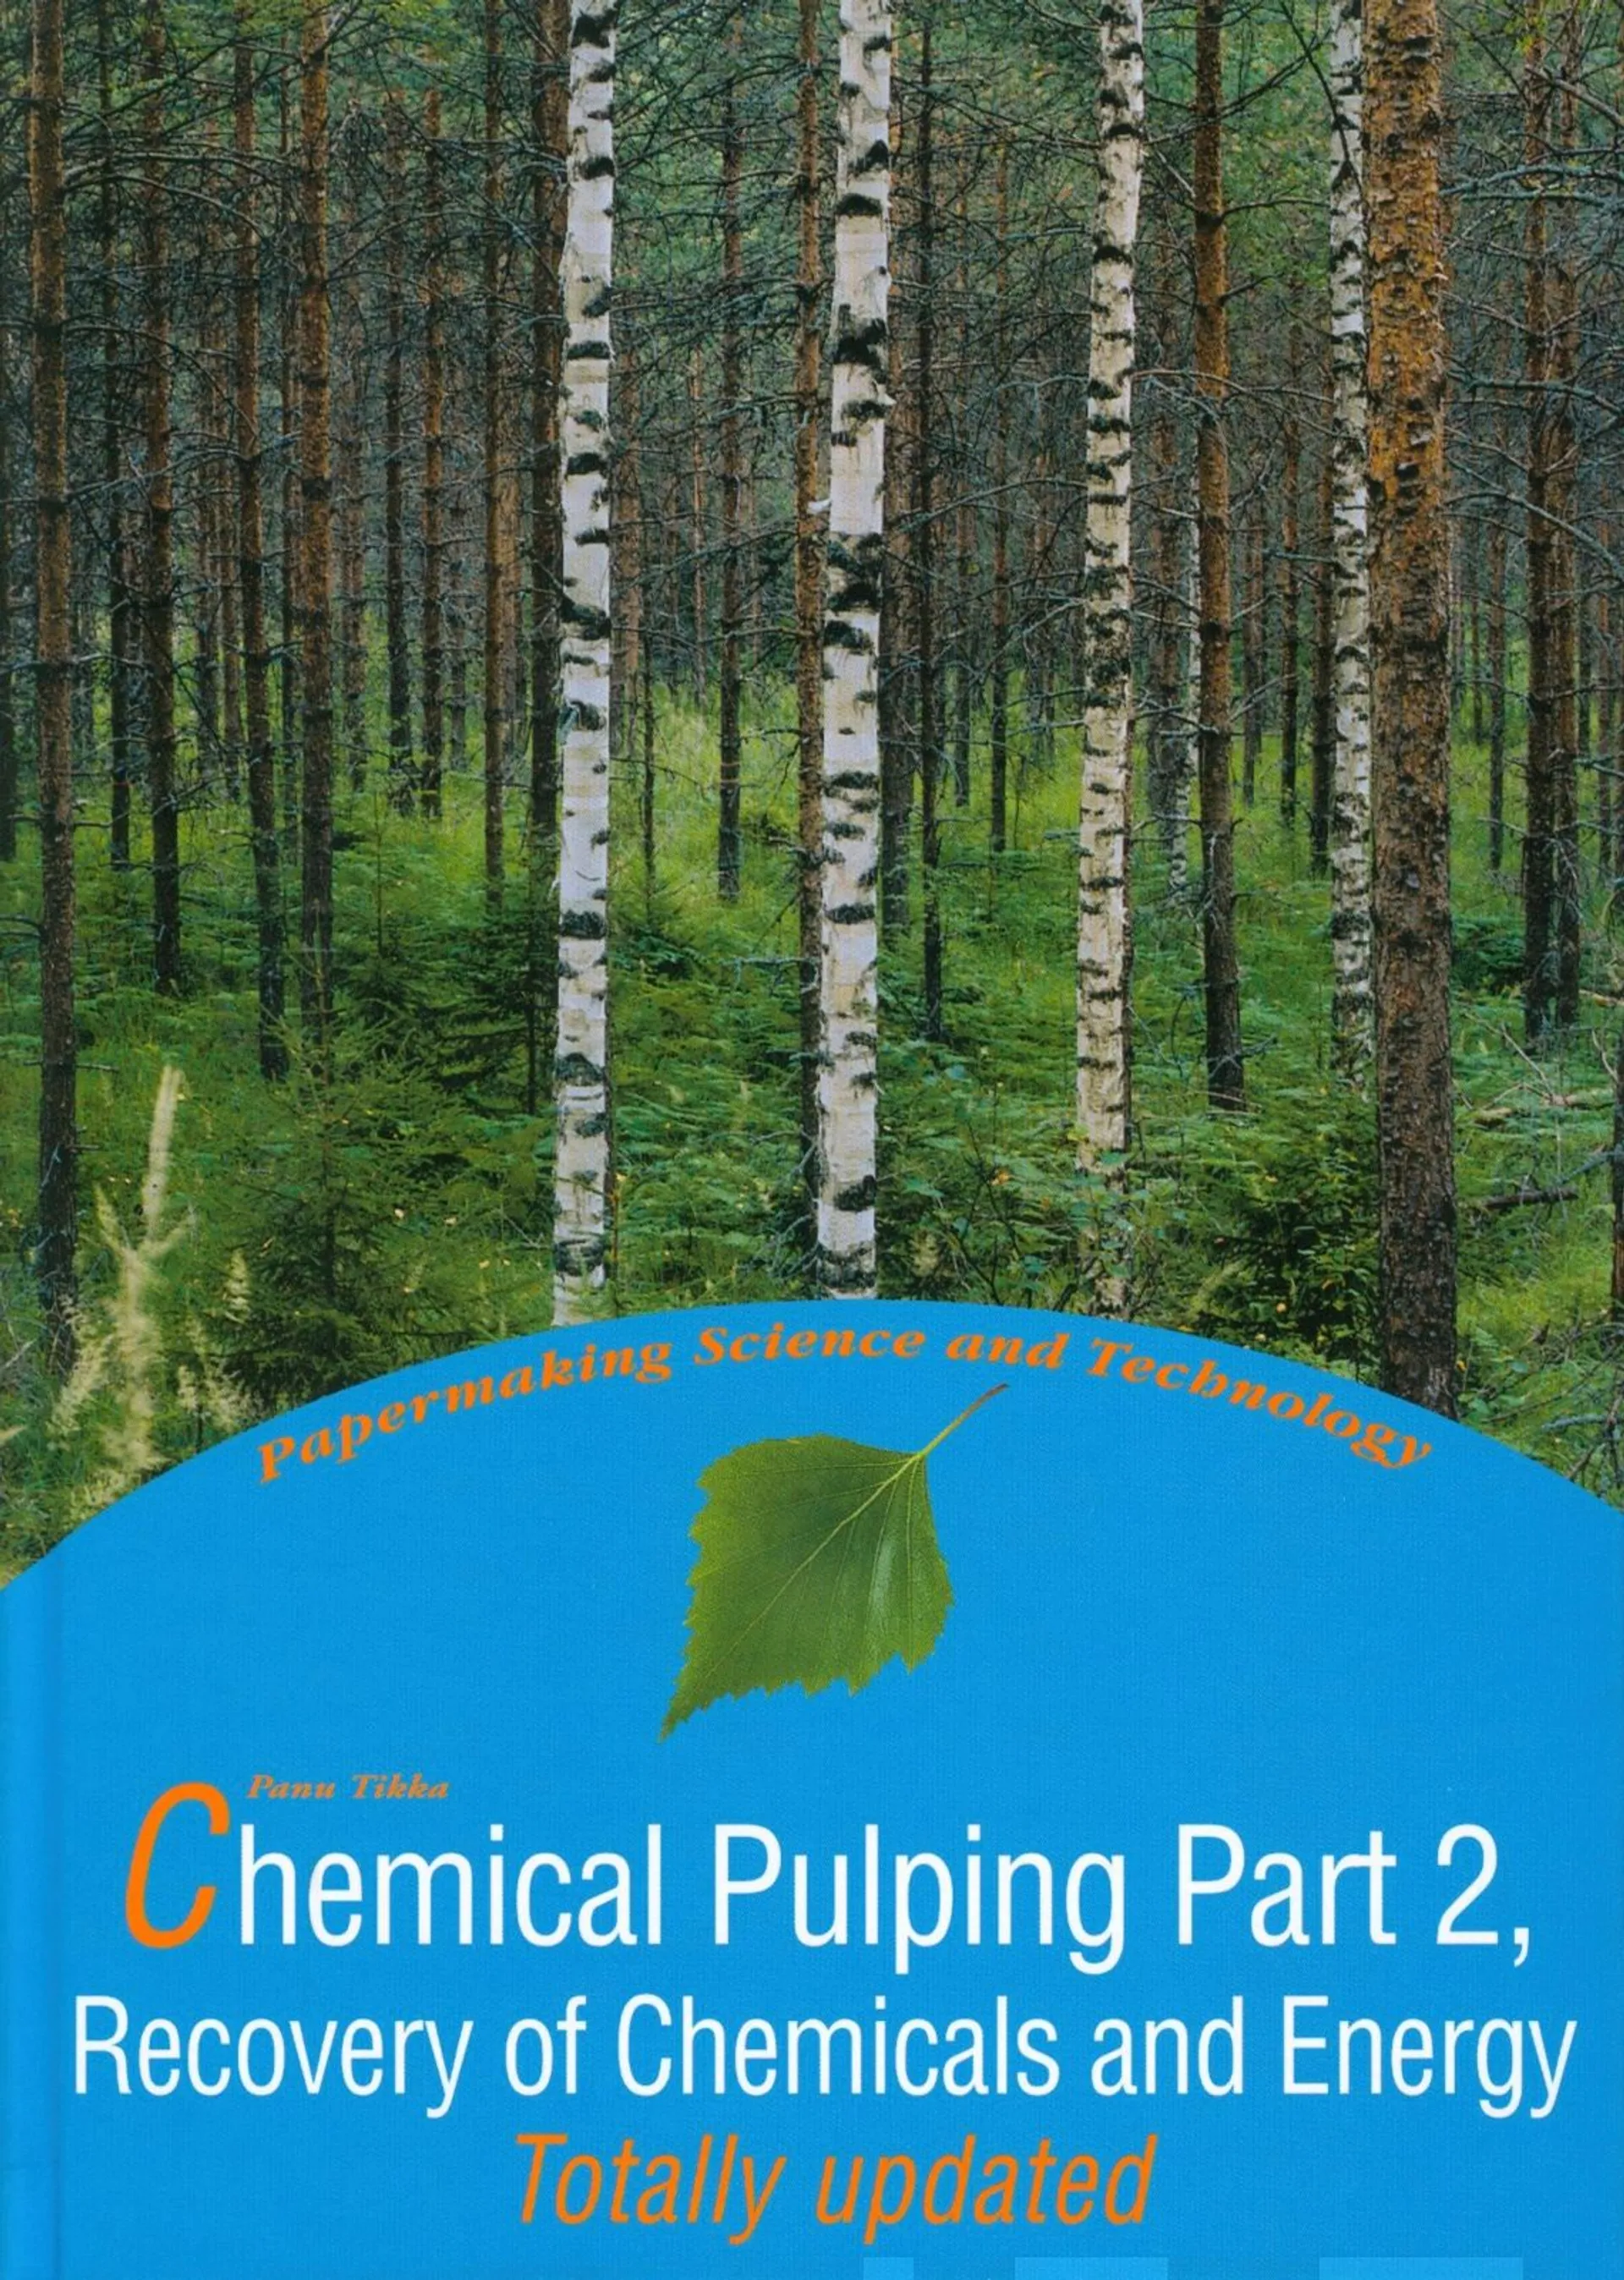 Chemical pulping Part 2 - Recovery of Chemicals and Energy